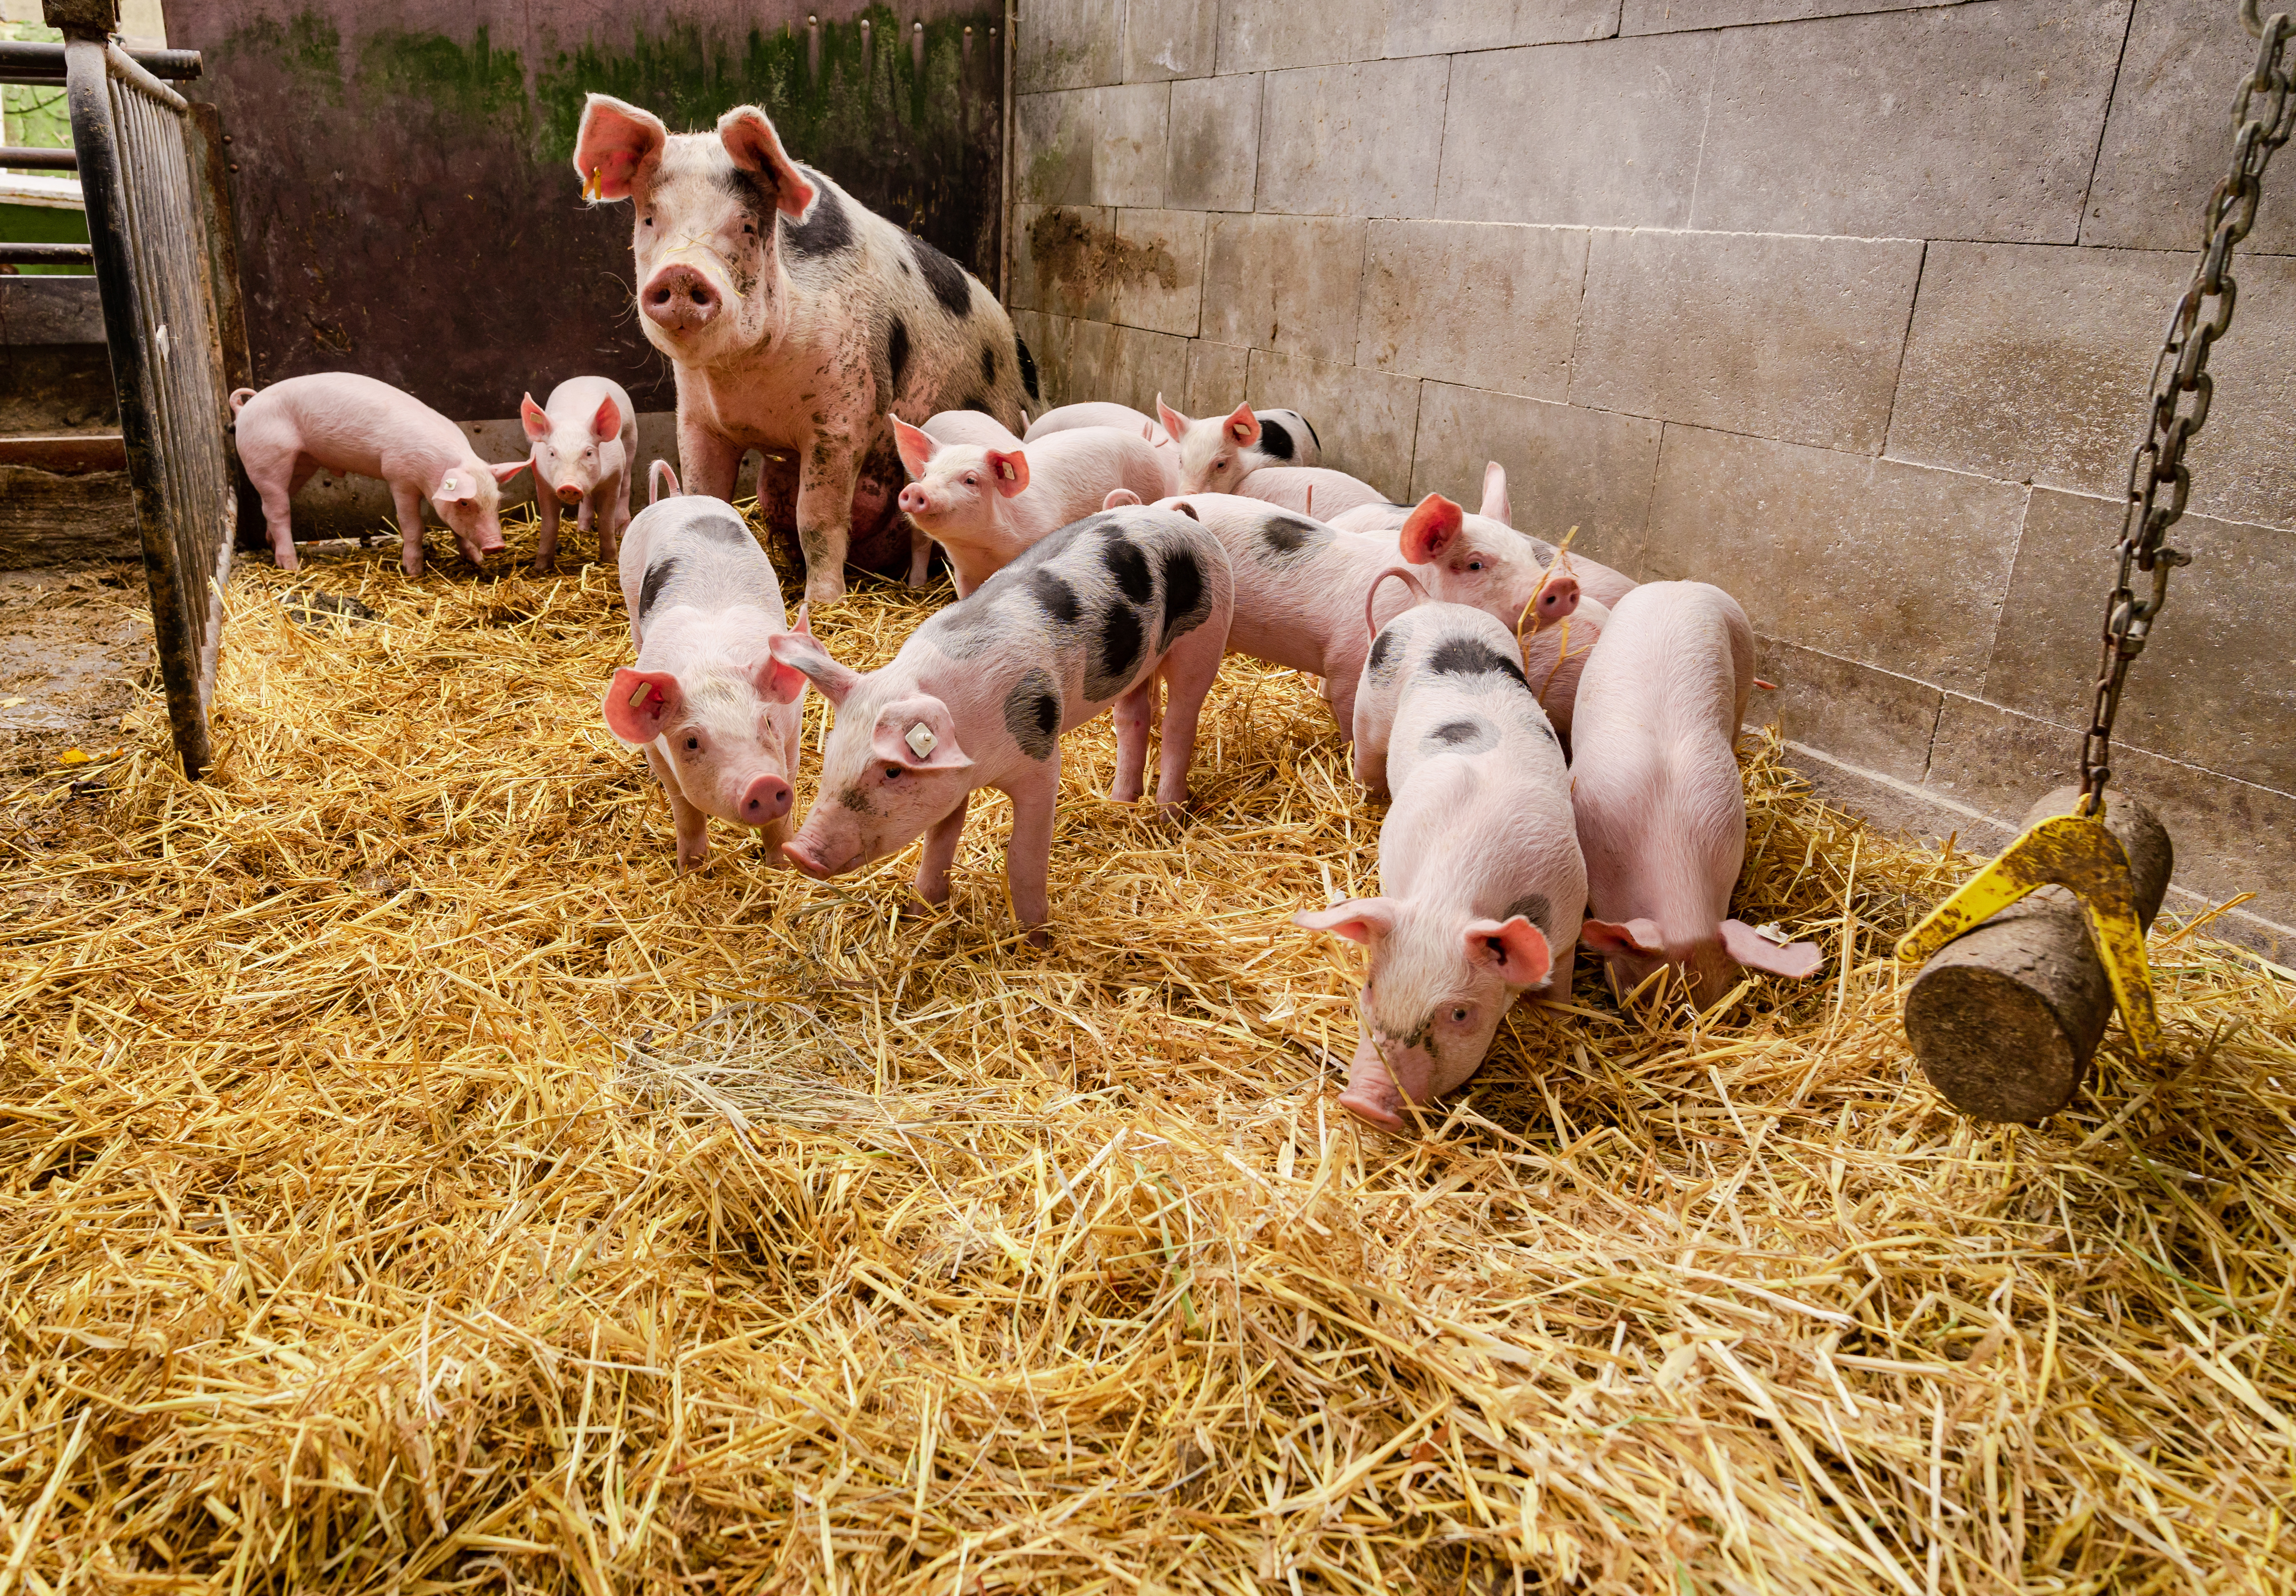 sow and piglets standing in a pen with straw enrichment